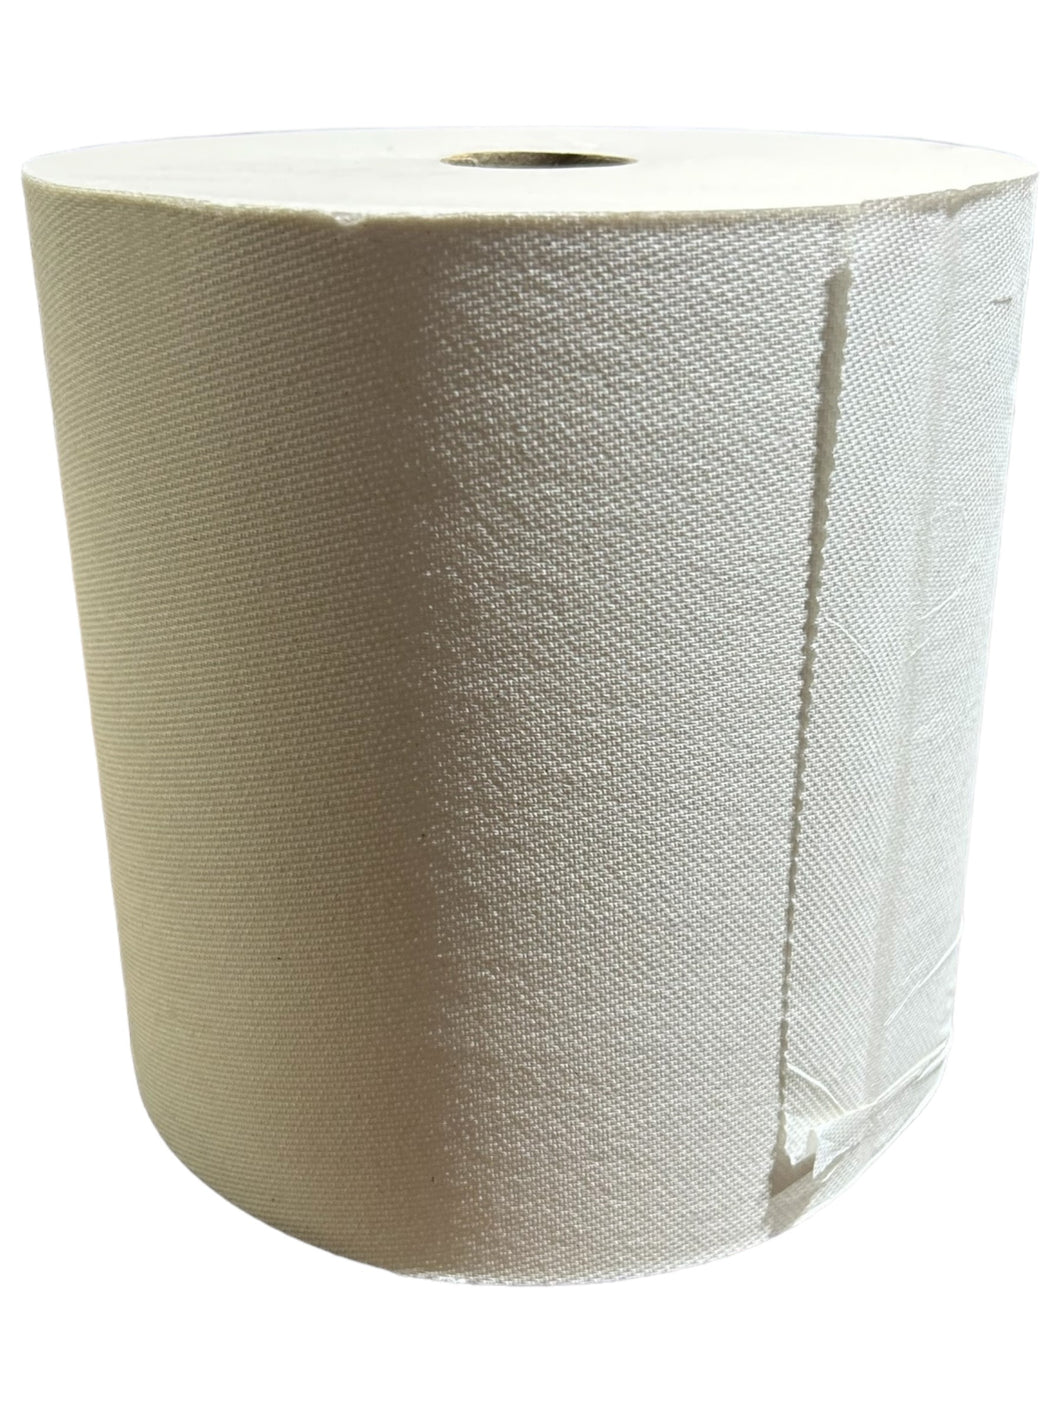 Scott Brand, 01000, Roll Towels, White, 8 in Roll Wd, 1,000 ft Roll Lg, Continuous Sheet Lg, Hardwound, 12 PK - FreemanLiquidators - [product_description]